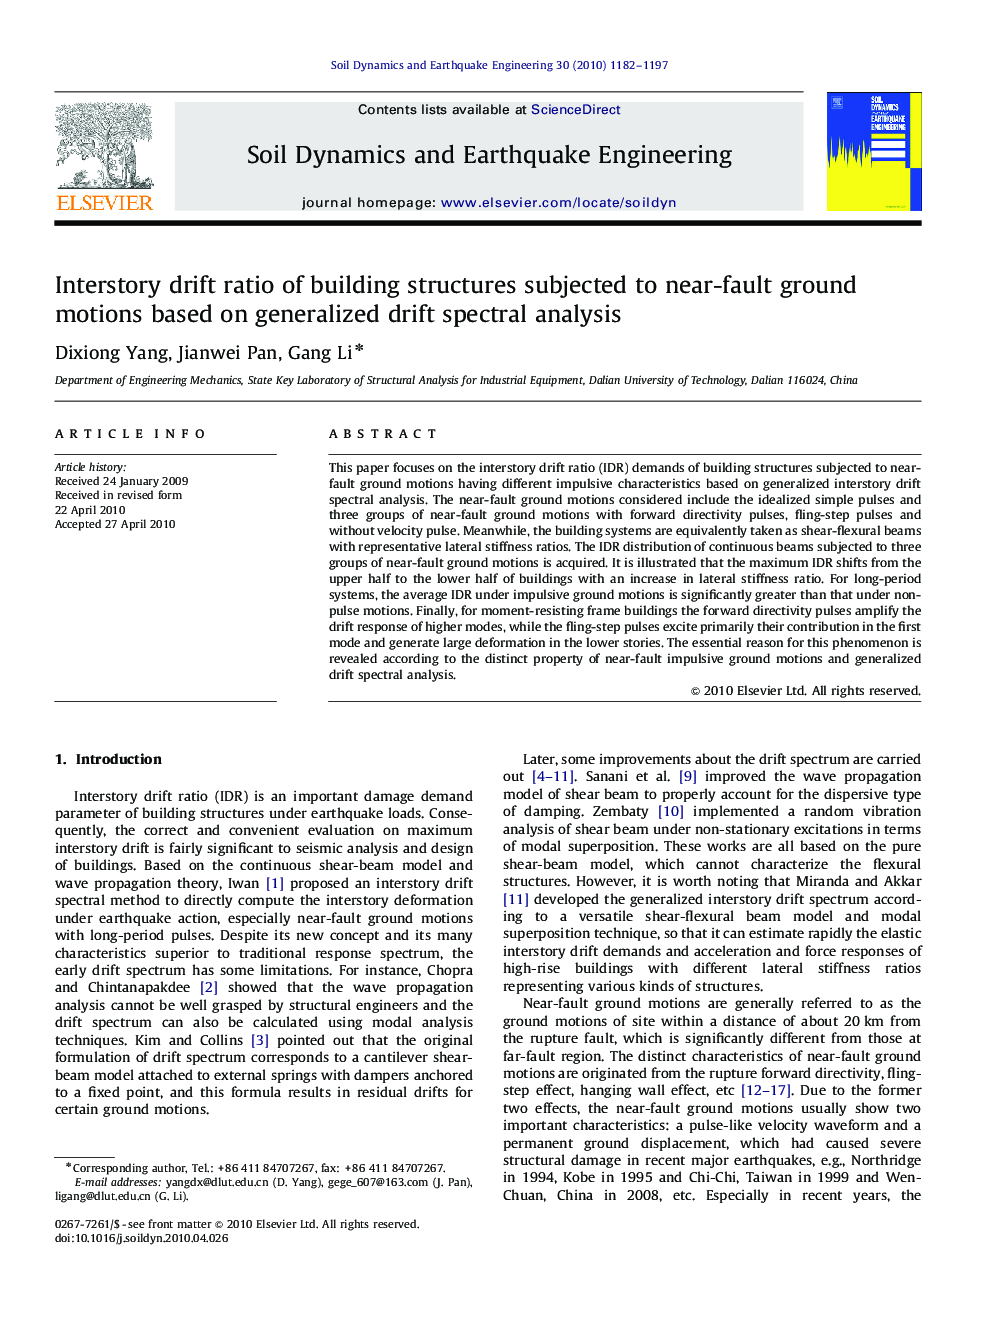 Interstory drift ratio of building structures subjected to near-fault ground motions based on generalized drift spectral analysis